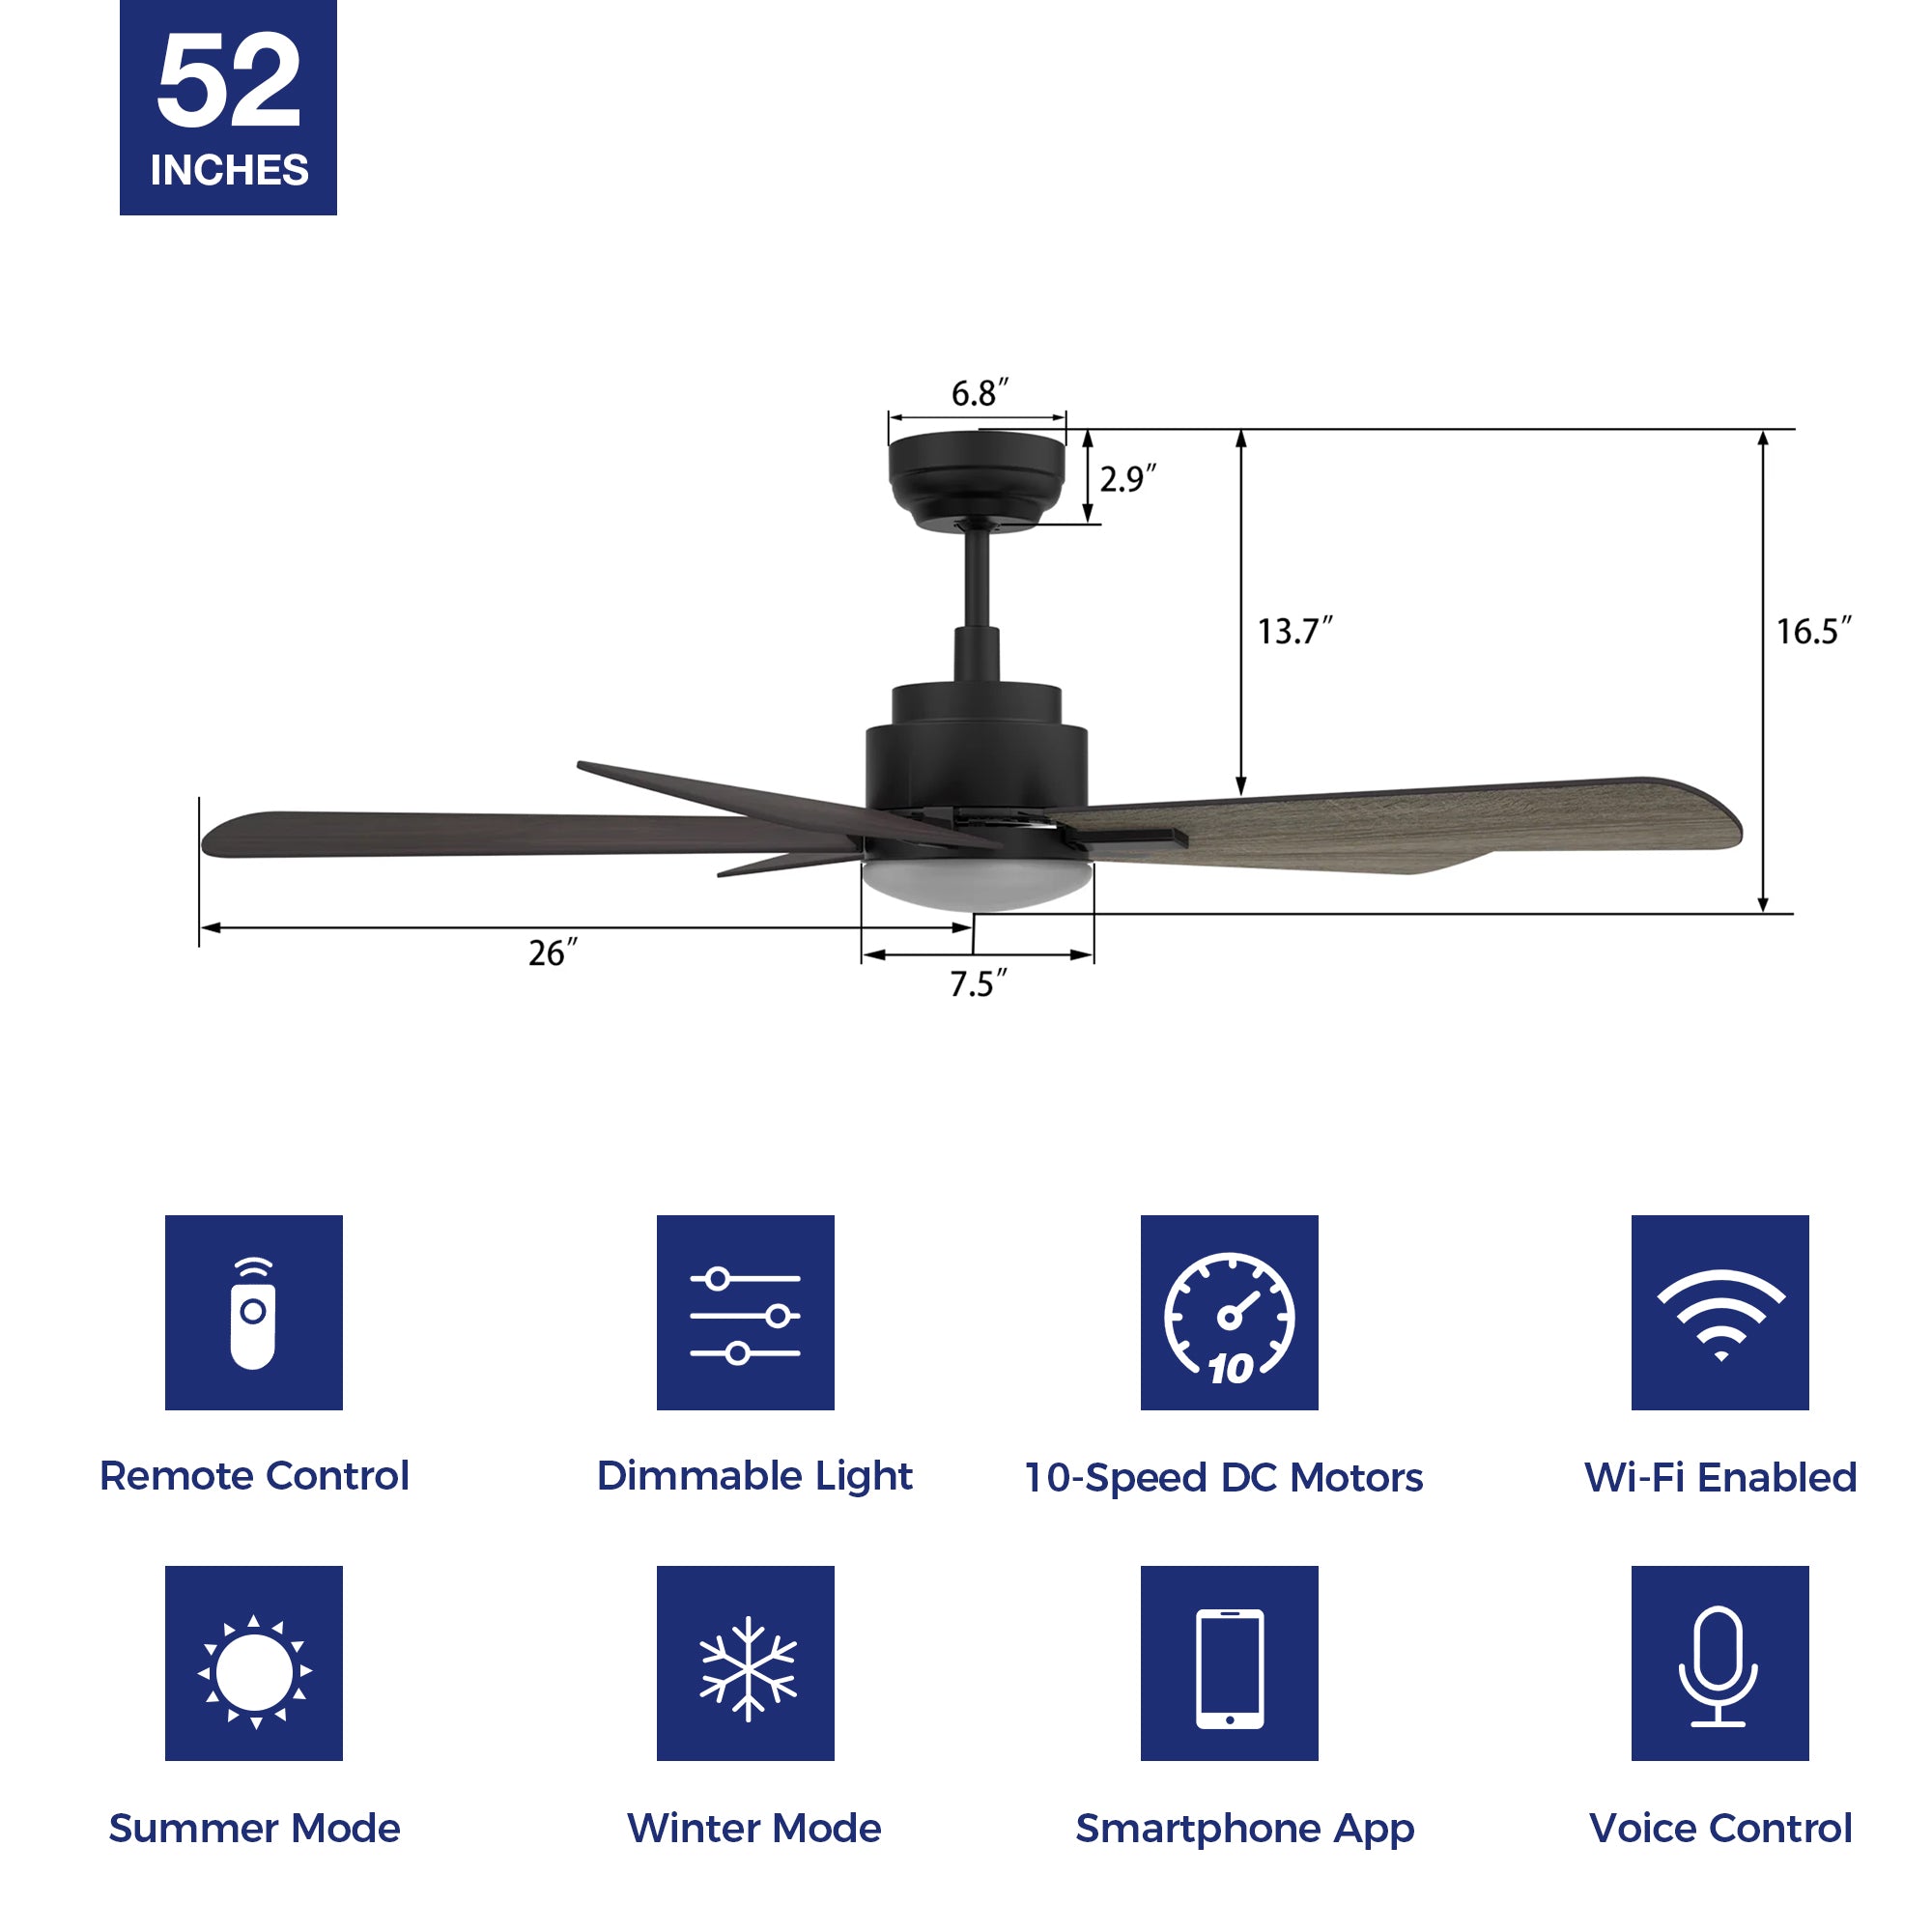 This Elgin 52&#39;&#39; smart ceiling fan keeps your space cool, bright, and stylish. It is a soft modern masterpiece perfect for your large indoor living spaces. This Wifi smart ceiling fan is a simplicity designing with Black finish, use elegant Plywood blades and has an integrated 4000K LED cool light. The fan features Remote control, Wi-Fi apps, Siri Shortcut and Voice control technology (compatible with Amazon Alexa and Google Home Assistant ) to set fan preferences. 